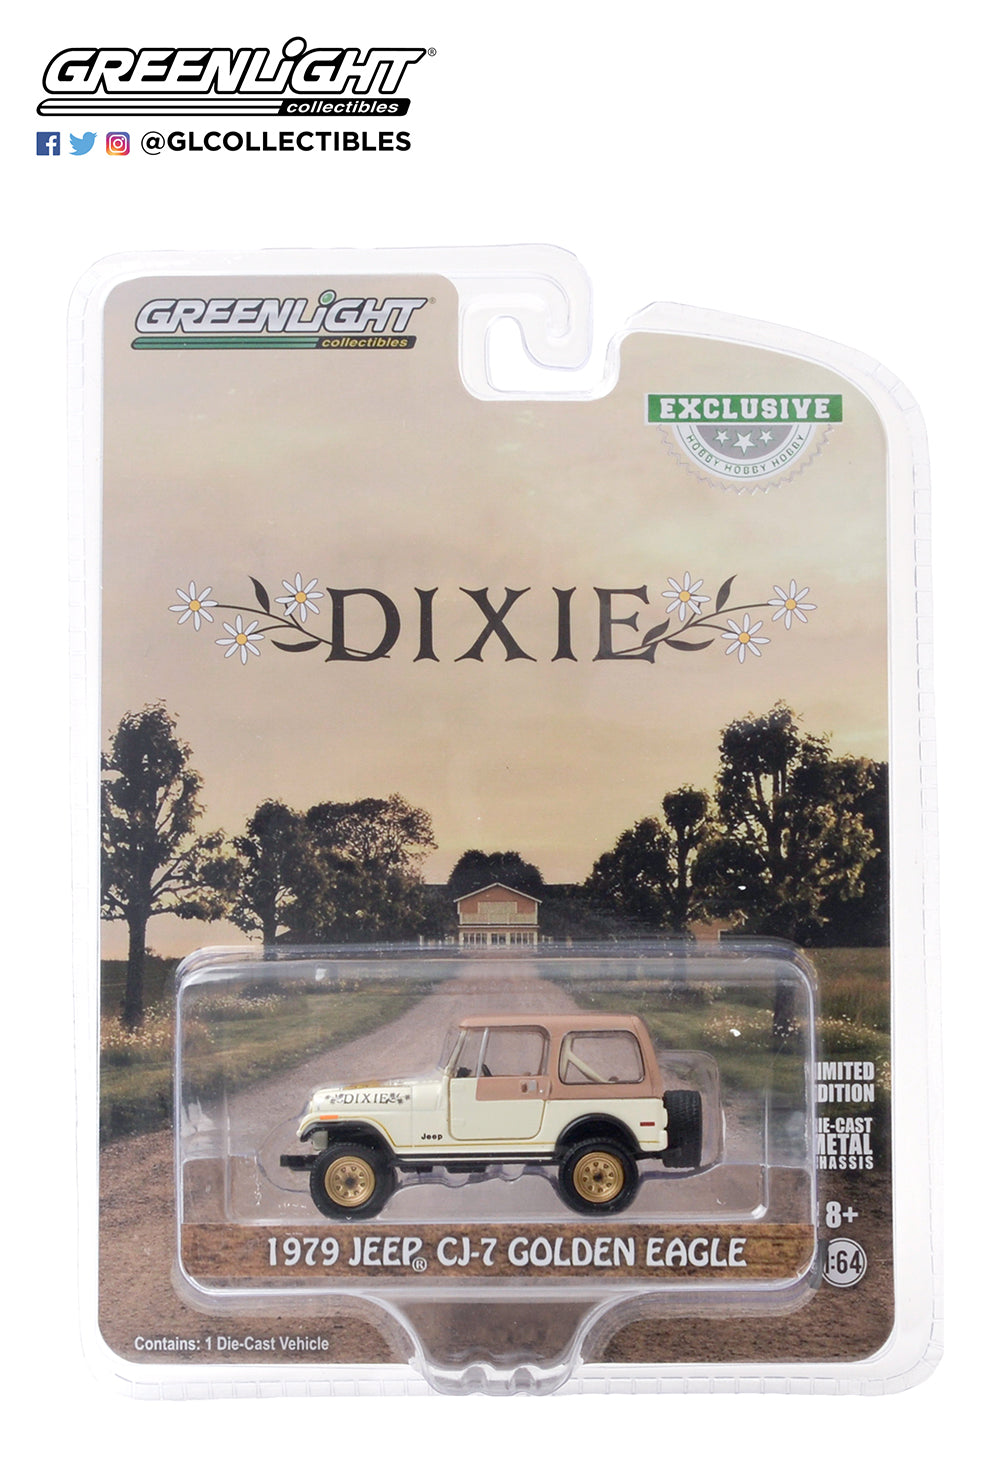 JEEP CJ7 GOLDEN EAGLE "DIXIE" HOBBY EXCL 6 OFF IN BOX 1979 1/64